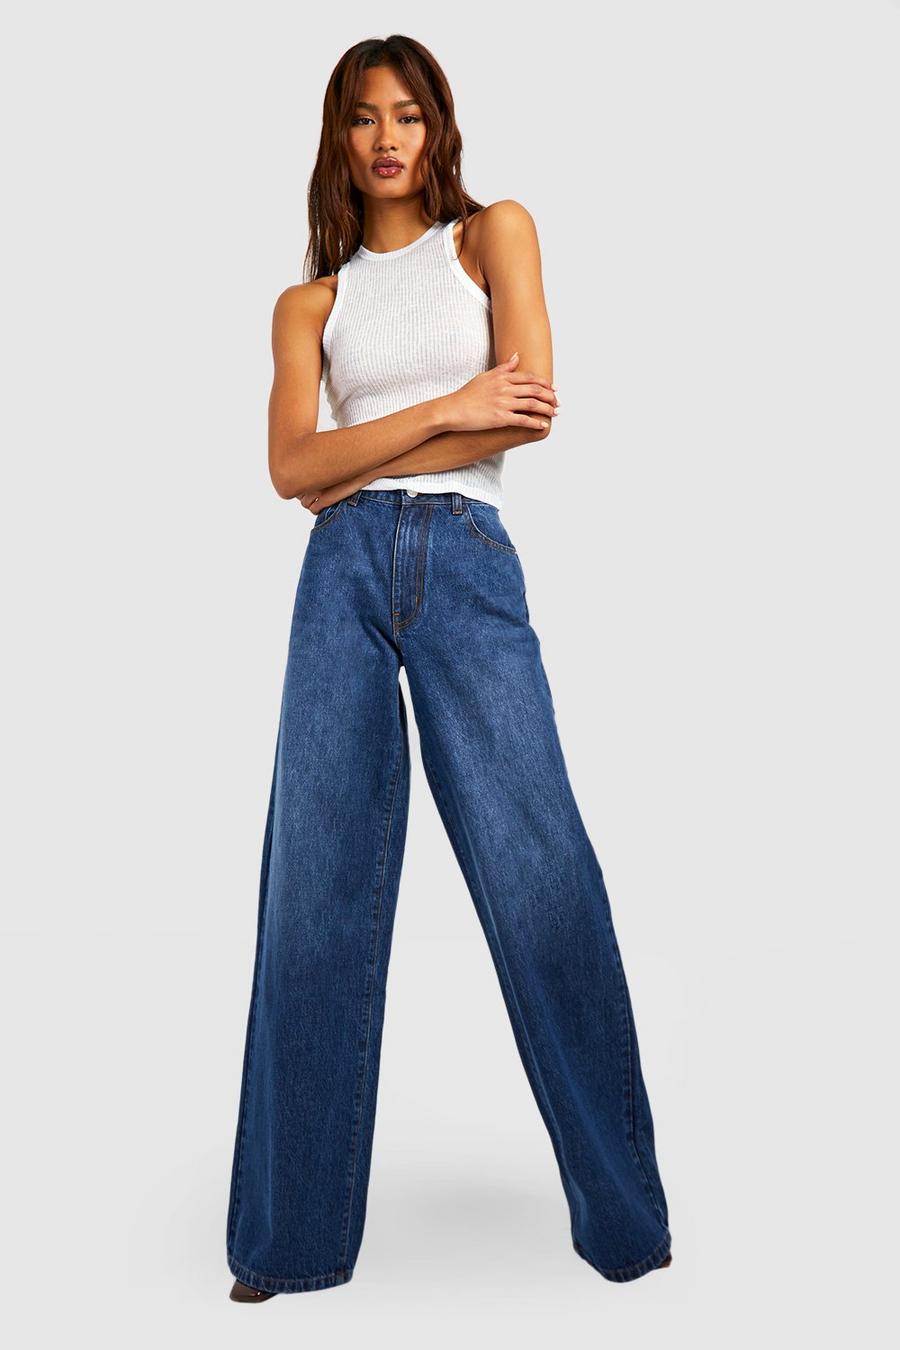 Indigo Tall Wide Leg Jeans image number 1